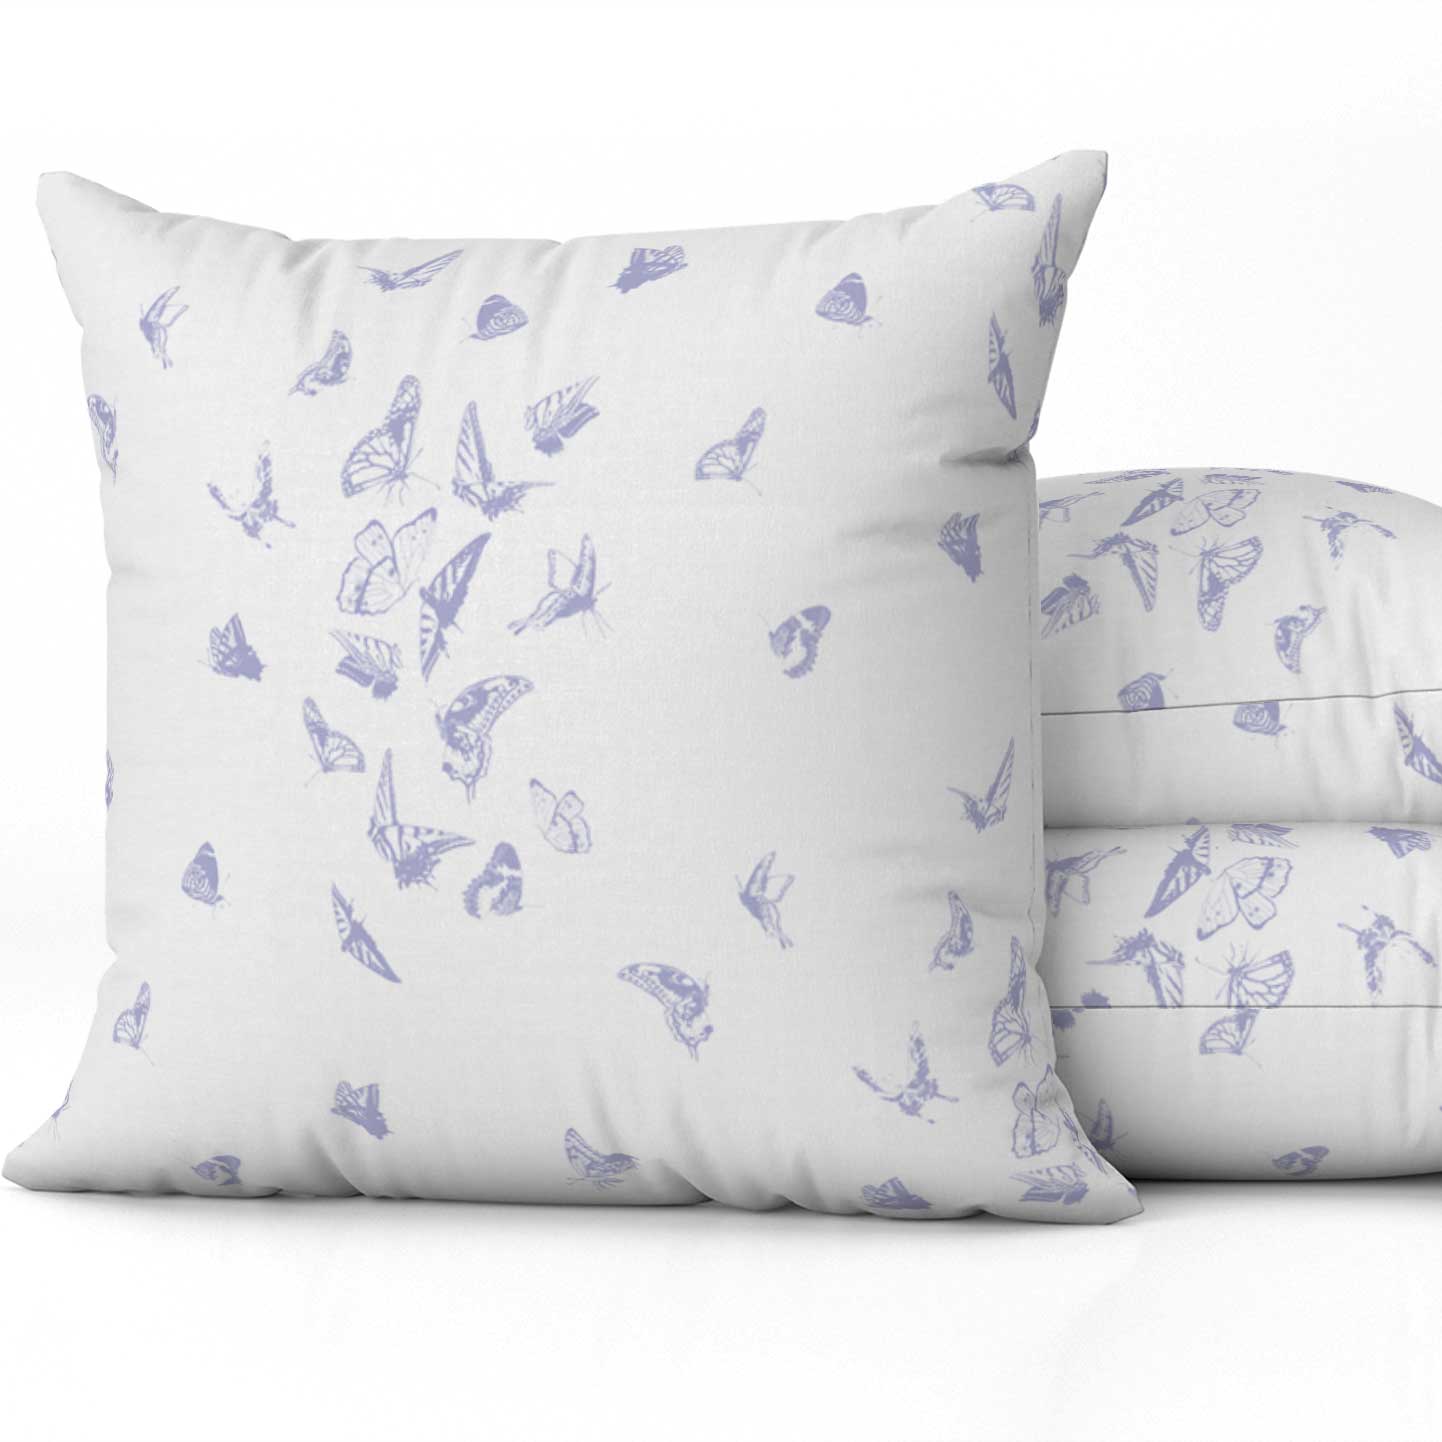 Butterfly Dance Square Pillow in Lavender